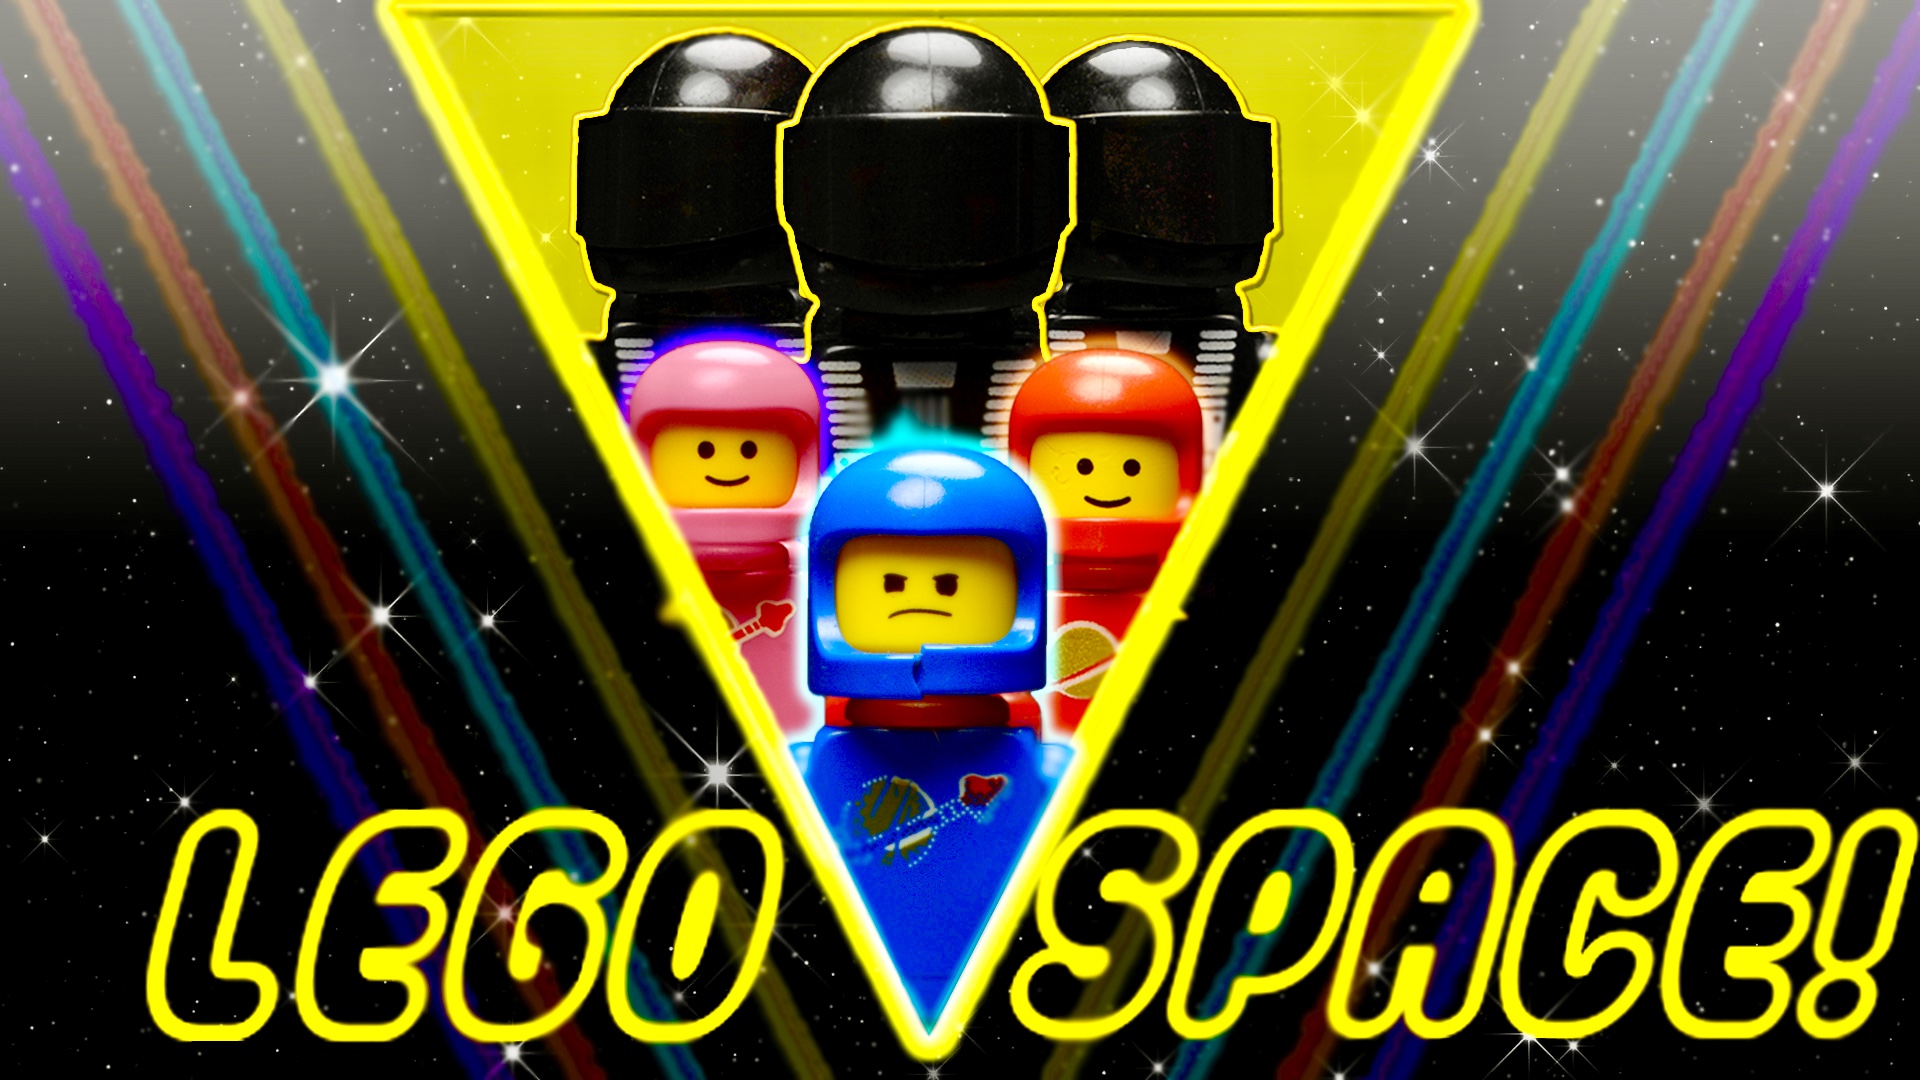 Zach Fernandez's the thumbnail for LEGO SPACE! Chapter 3. Probably not going to show a lot of behind the scenes stuff because spoilers, but it's definitely going to be